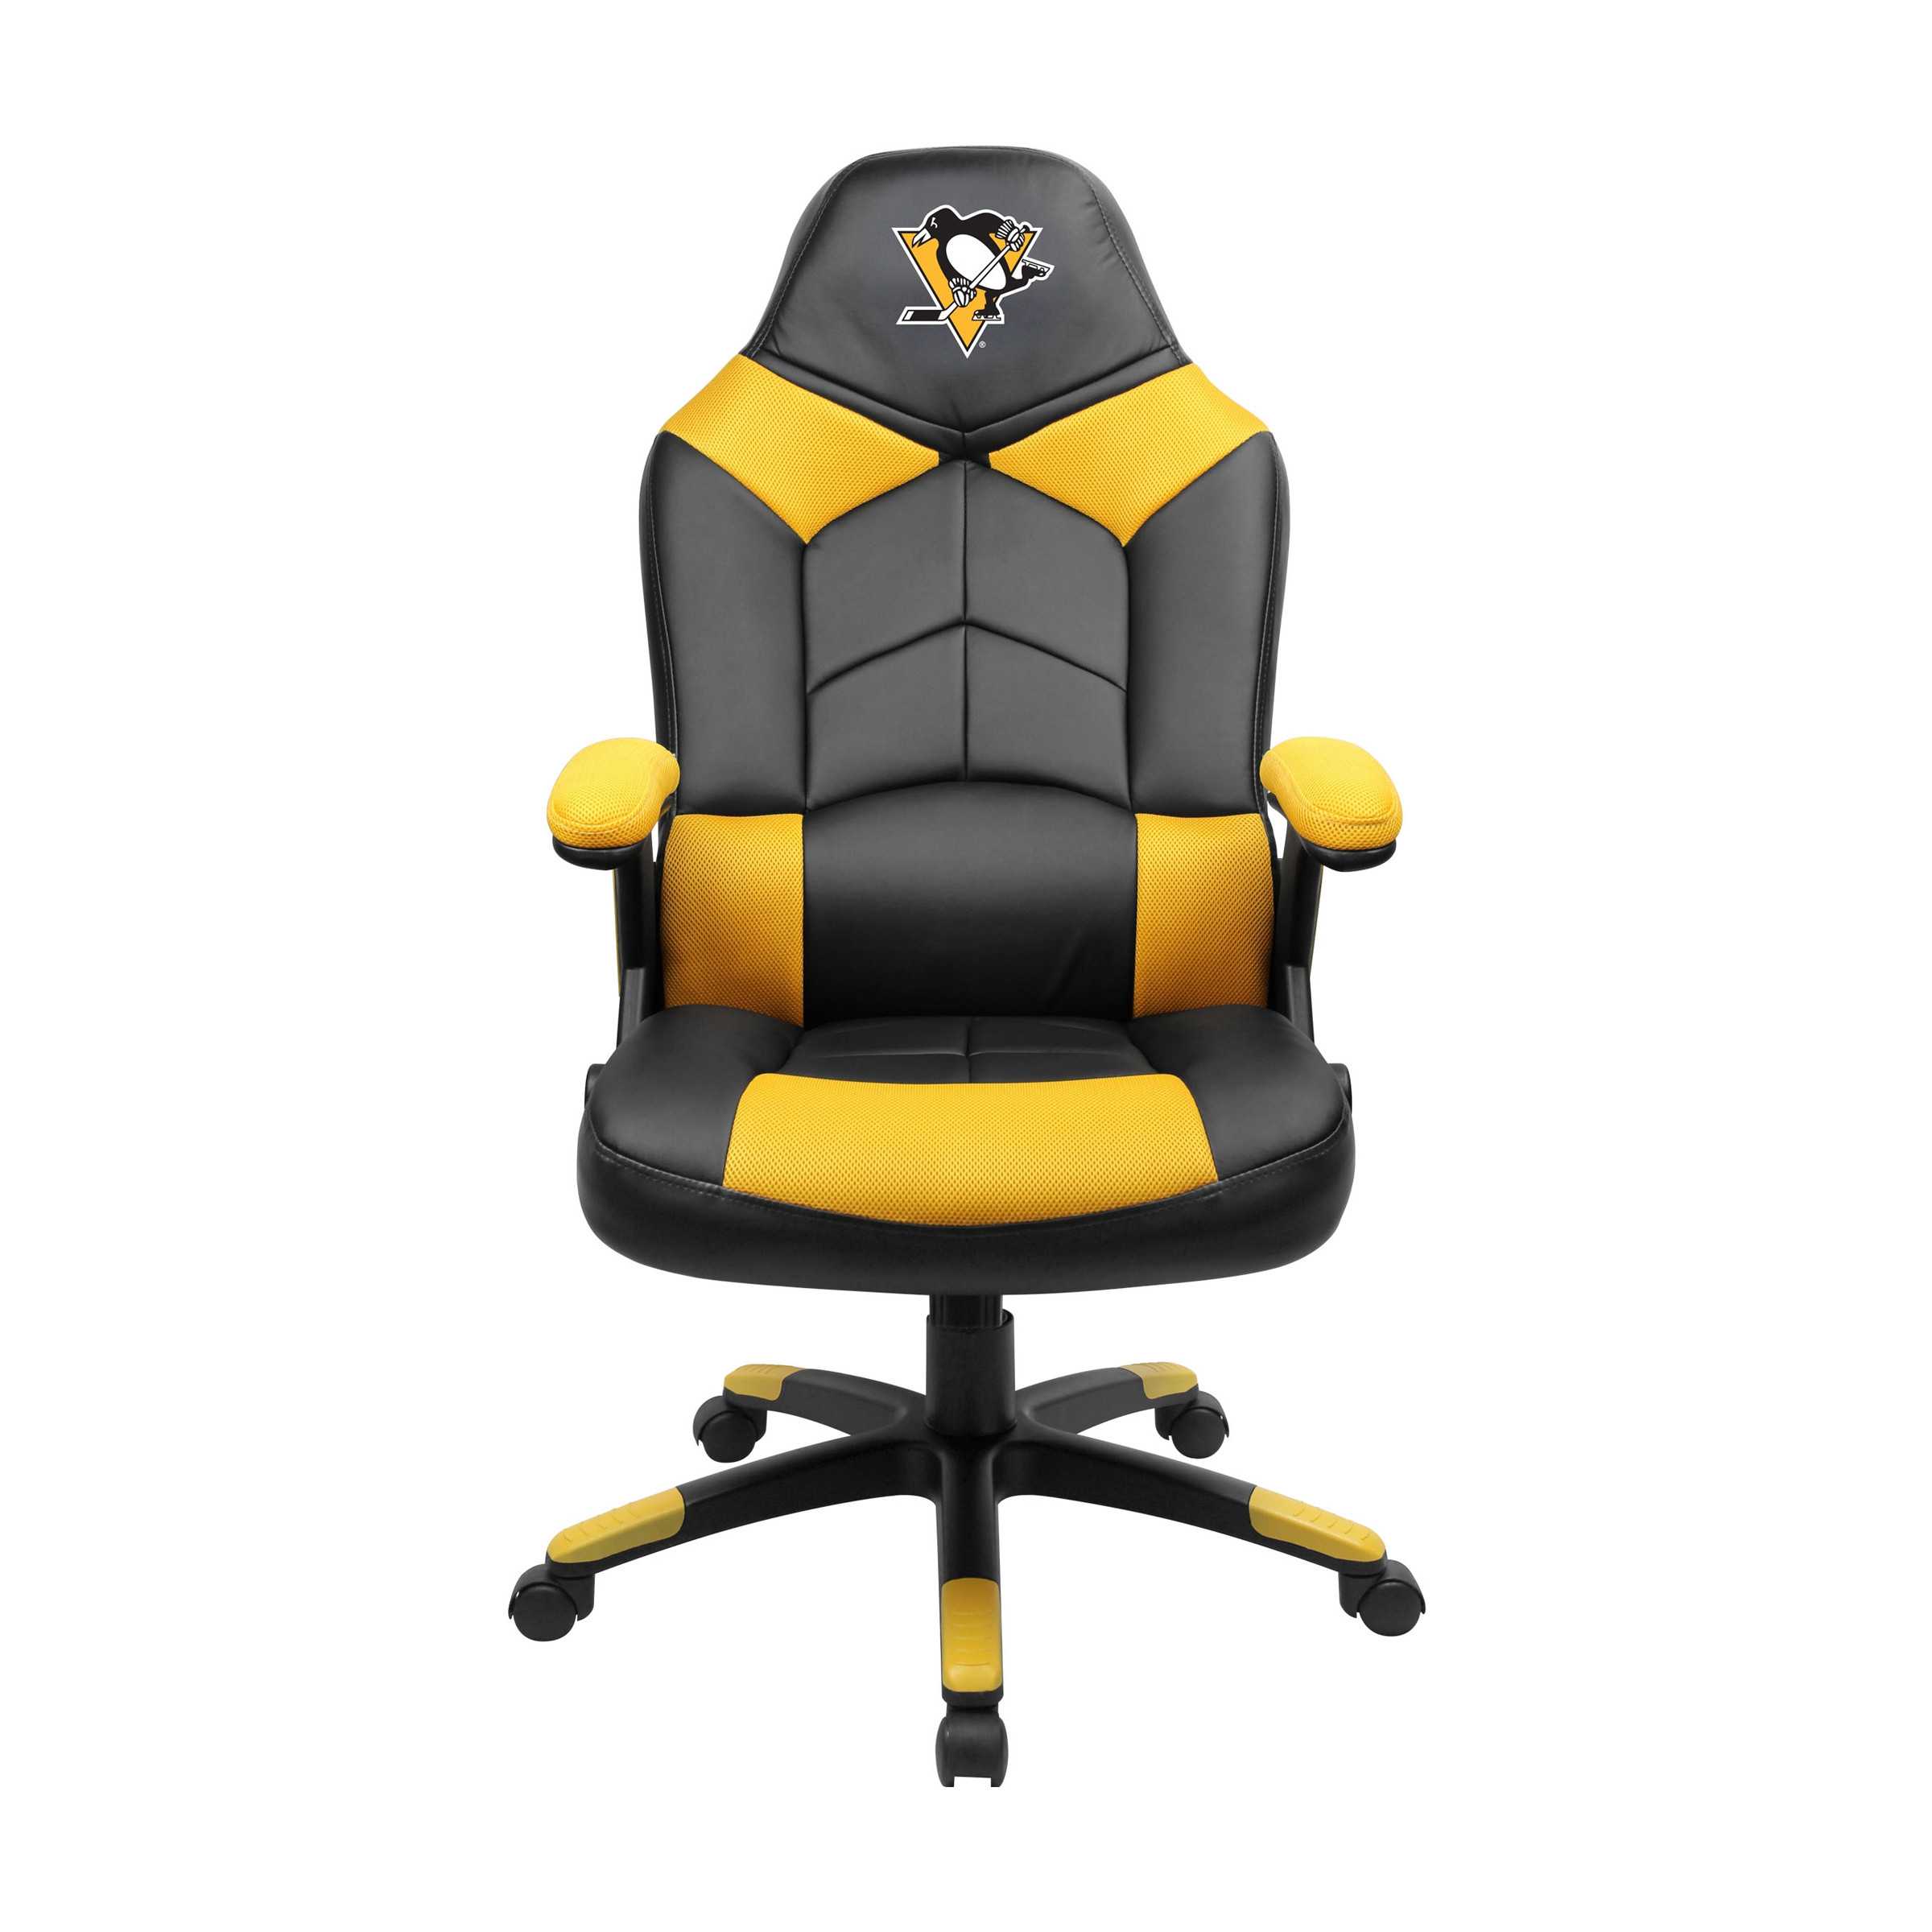 PITTSBURG PENGUINS OVERSIZED GAME CHAIR